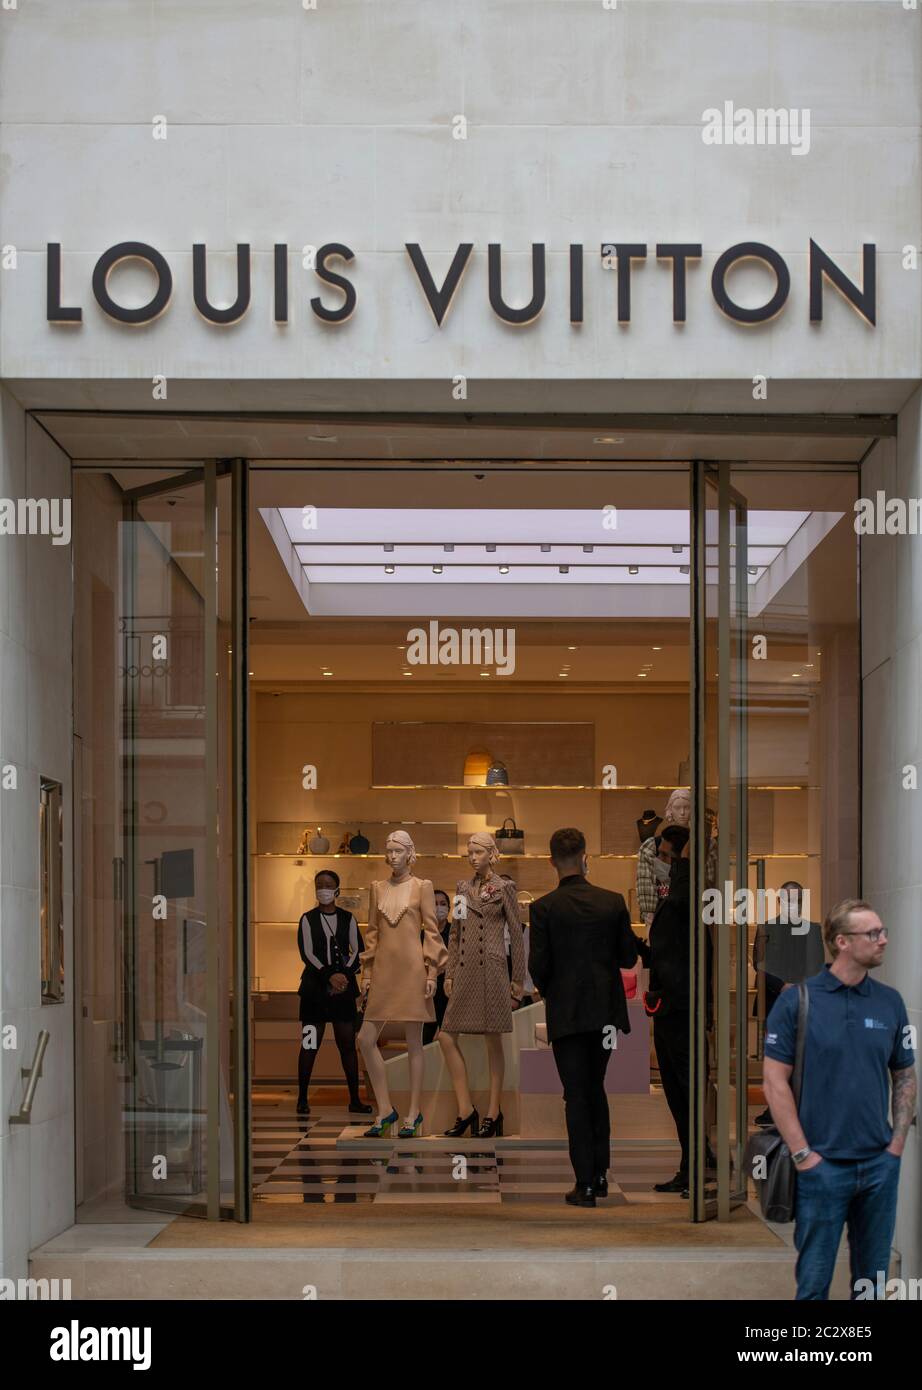 Shoppers in masks wait in line at the Louis Vuitton store in the